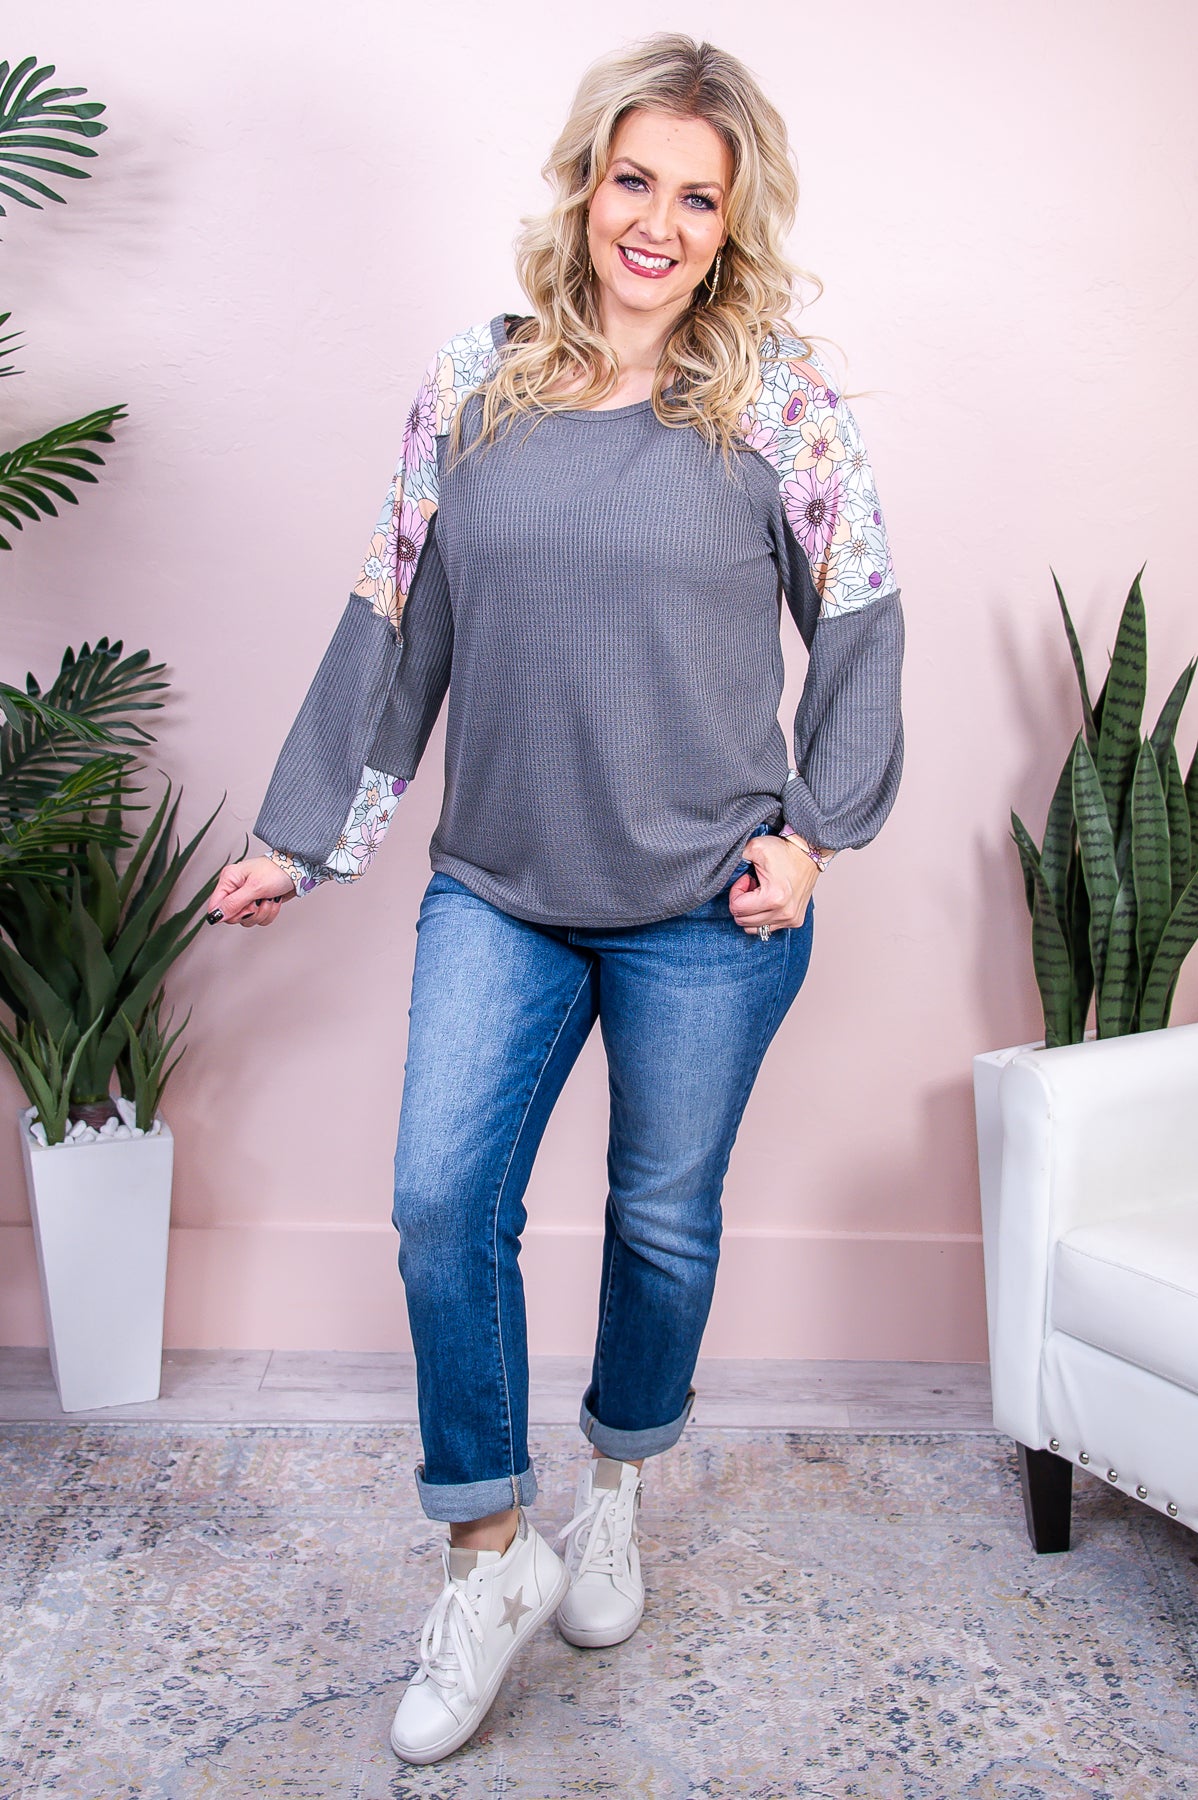 Blooming With Gratitude Gray/Multi Color Floral Top - T8649GR